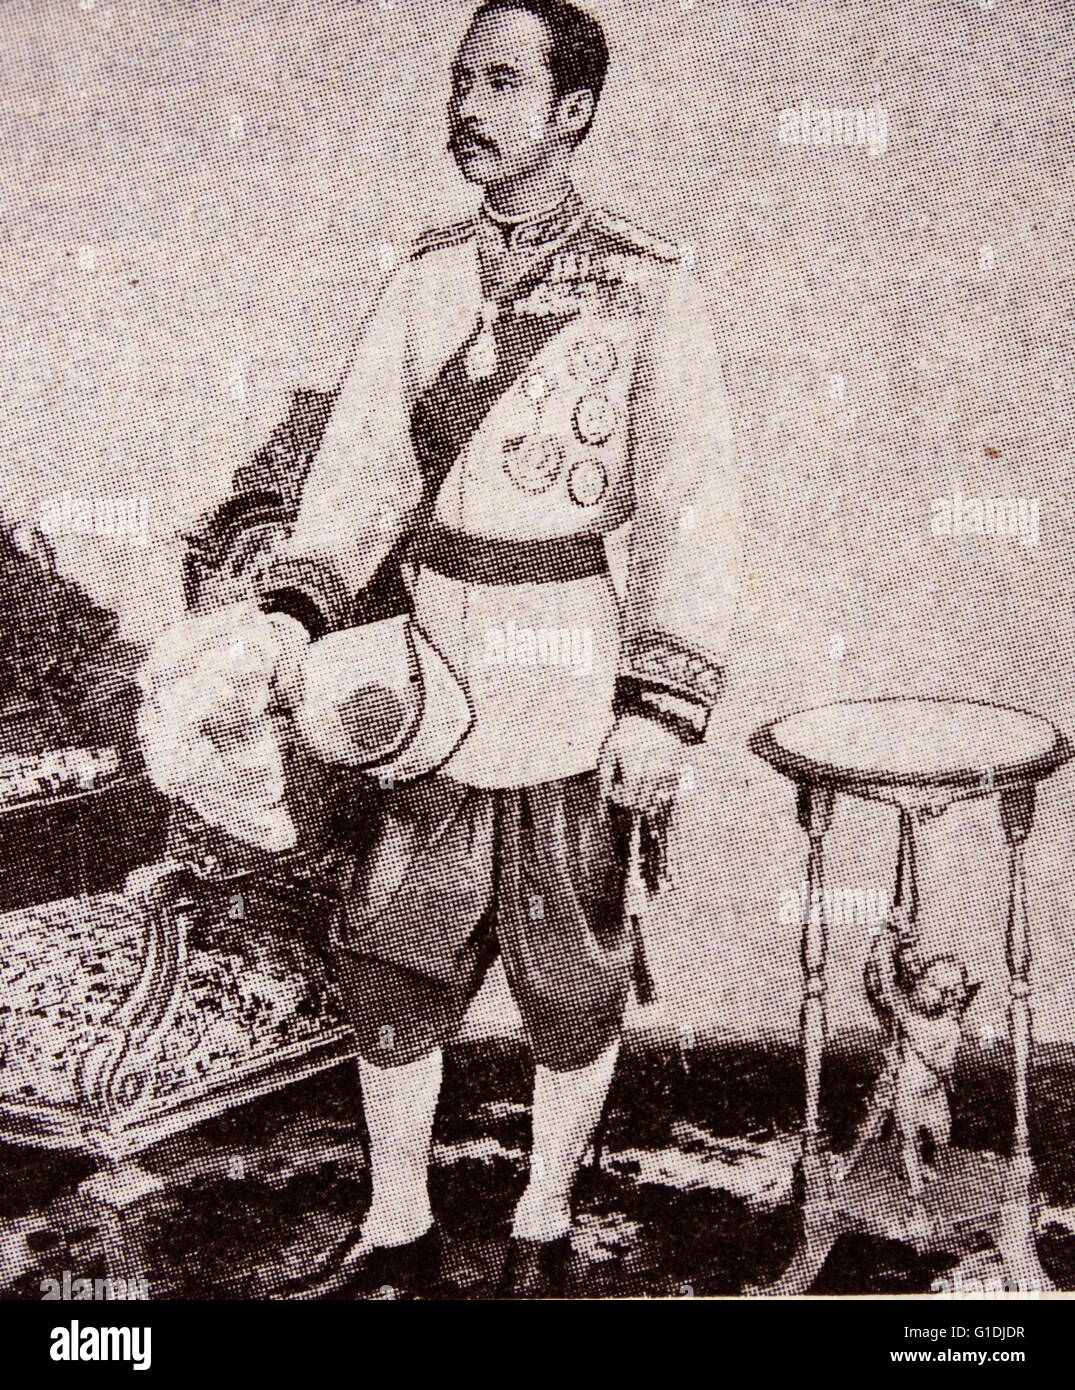 King Chulalongkorn Rama V, (1853-1910). King of Siam (Thailand) member of the Royal House of Chakri, known for modernising Siam during his reign from 1868-1910. Stock Photo